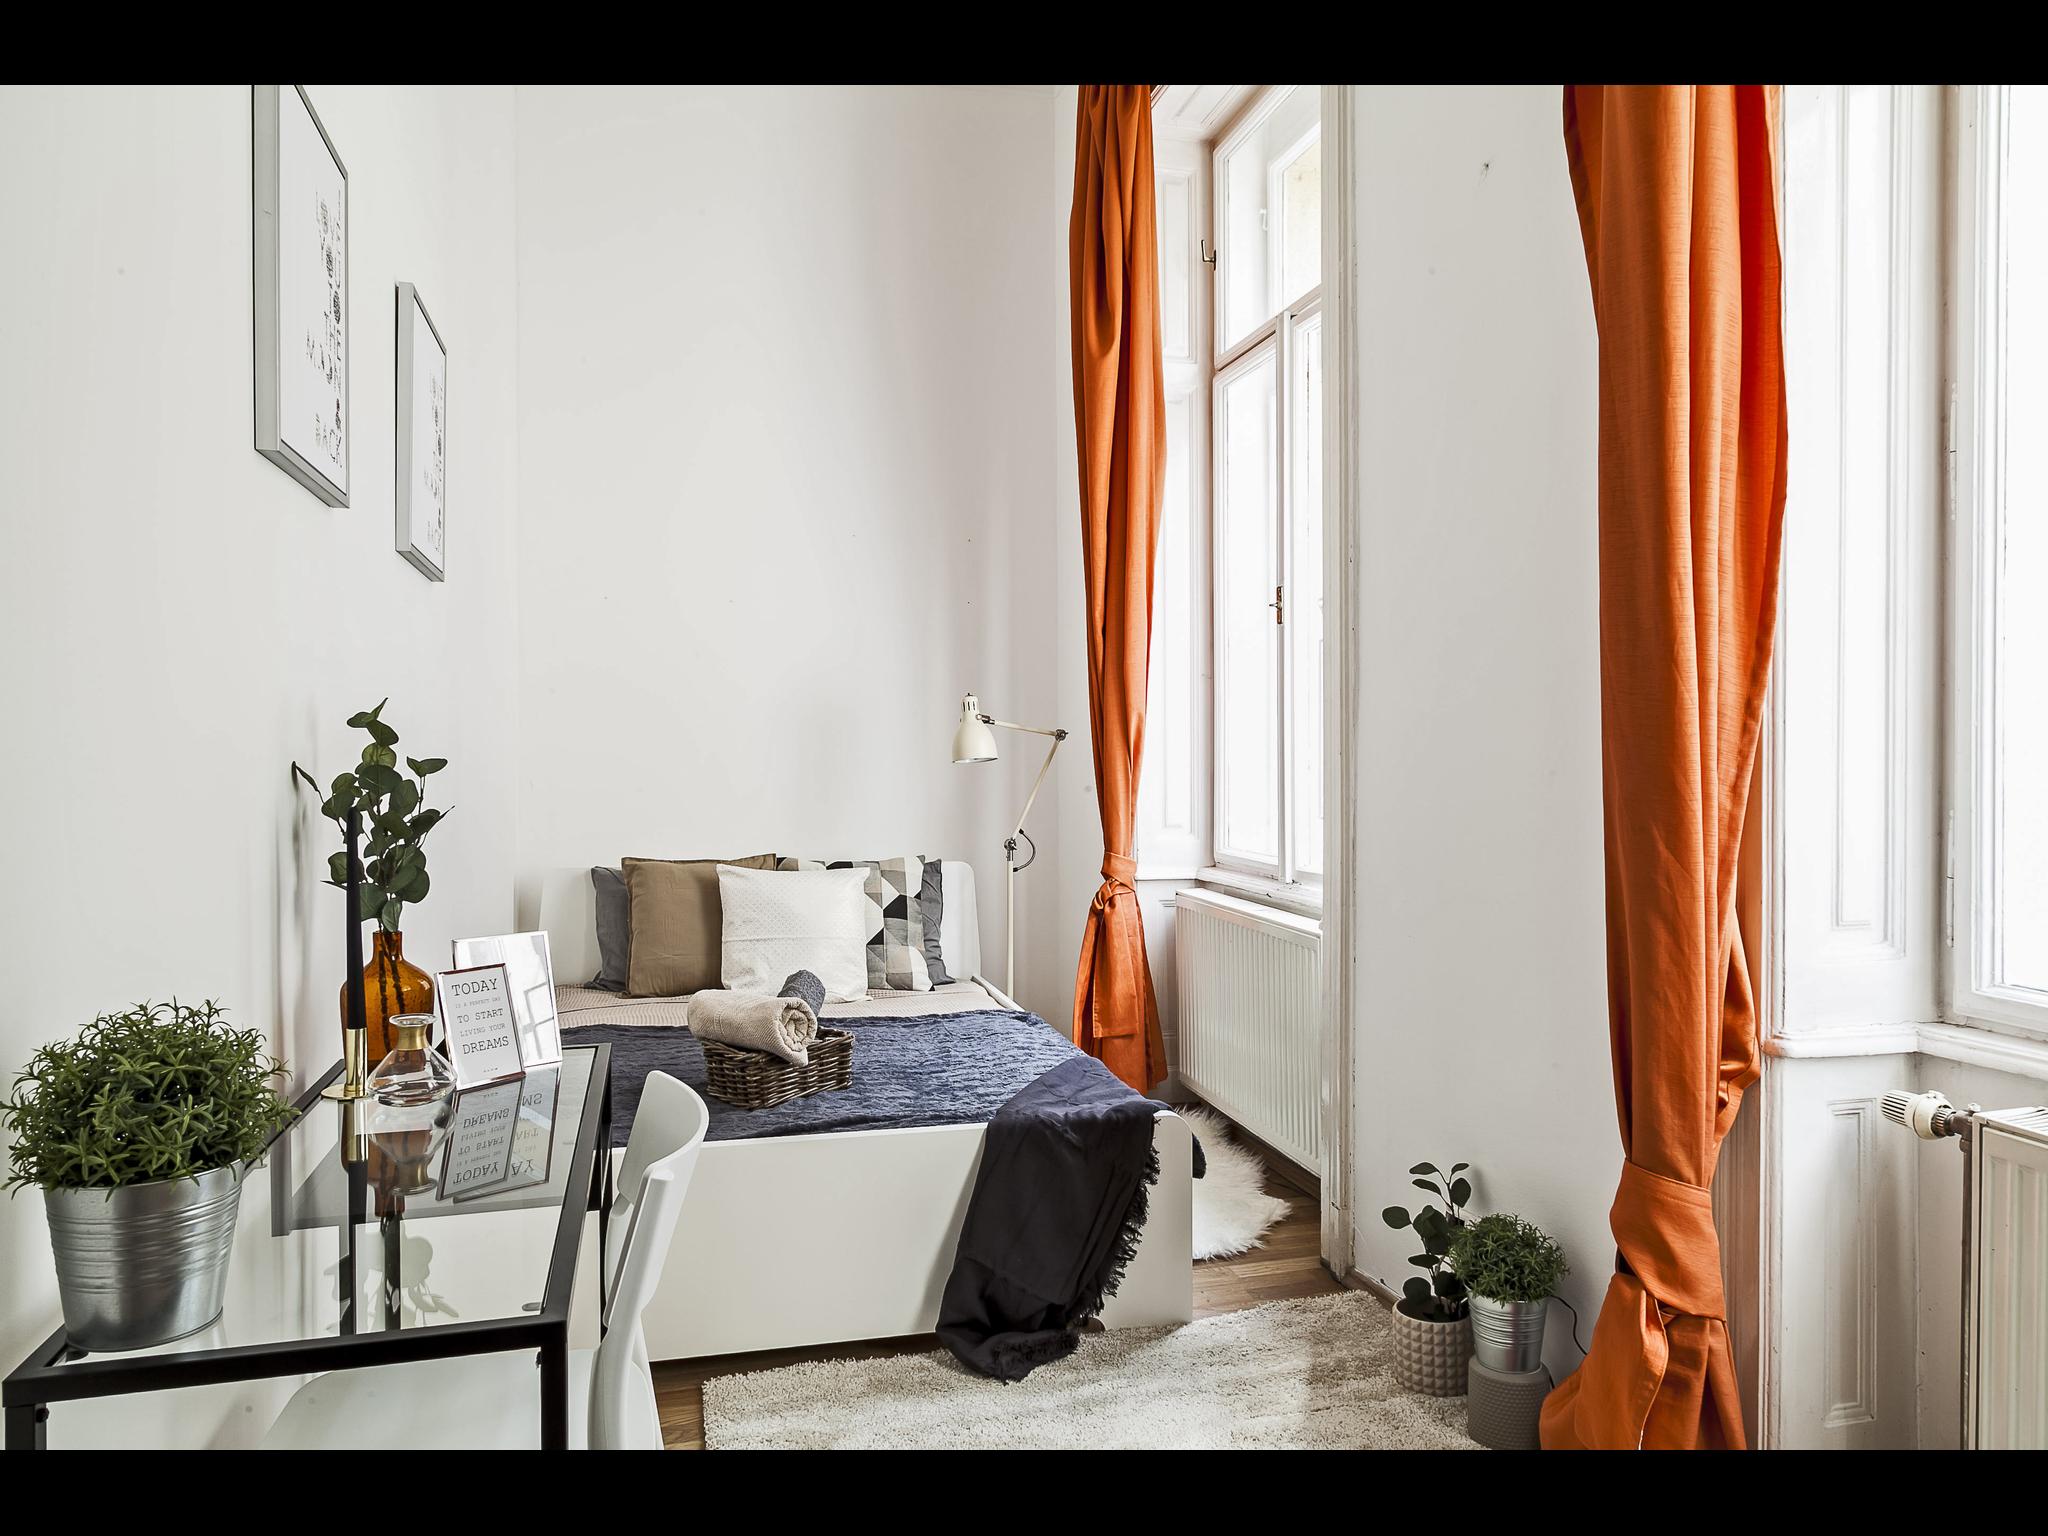 Nagymez 3 - Bedroom for rent in Budapest